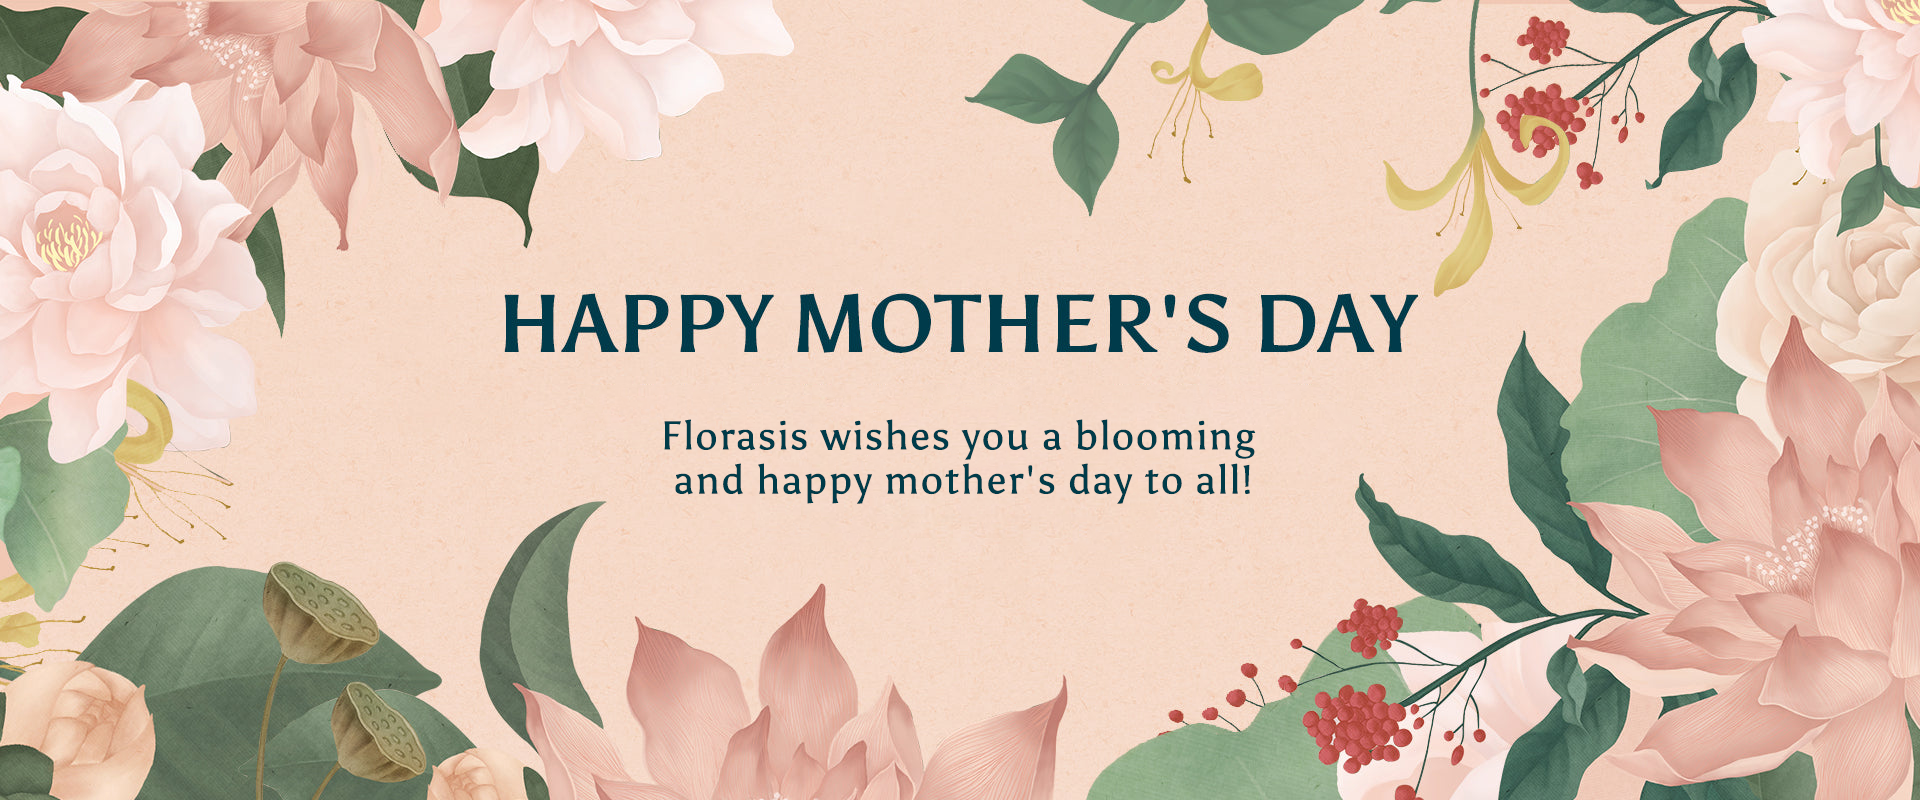 Celebrate Mother's Day with Florasis Makeup